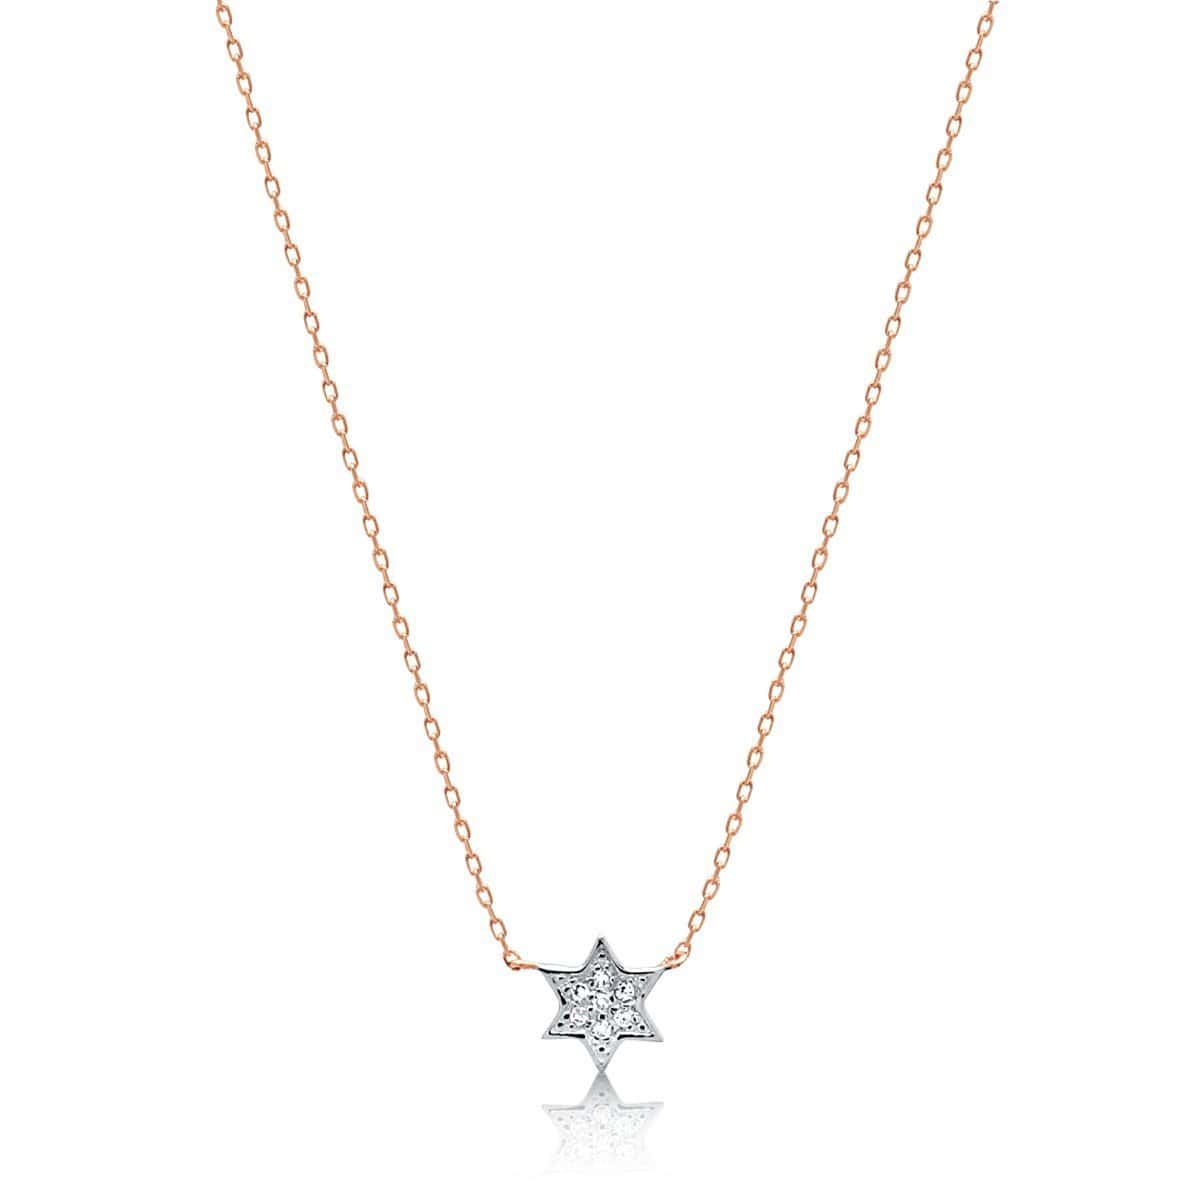 Alef Bet Necklaces Rose Gold Petite Diamond Jewish Star Necklace in 14k Gold, White Gold or Rose Gold